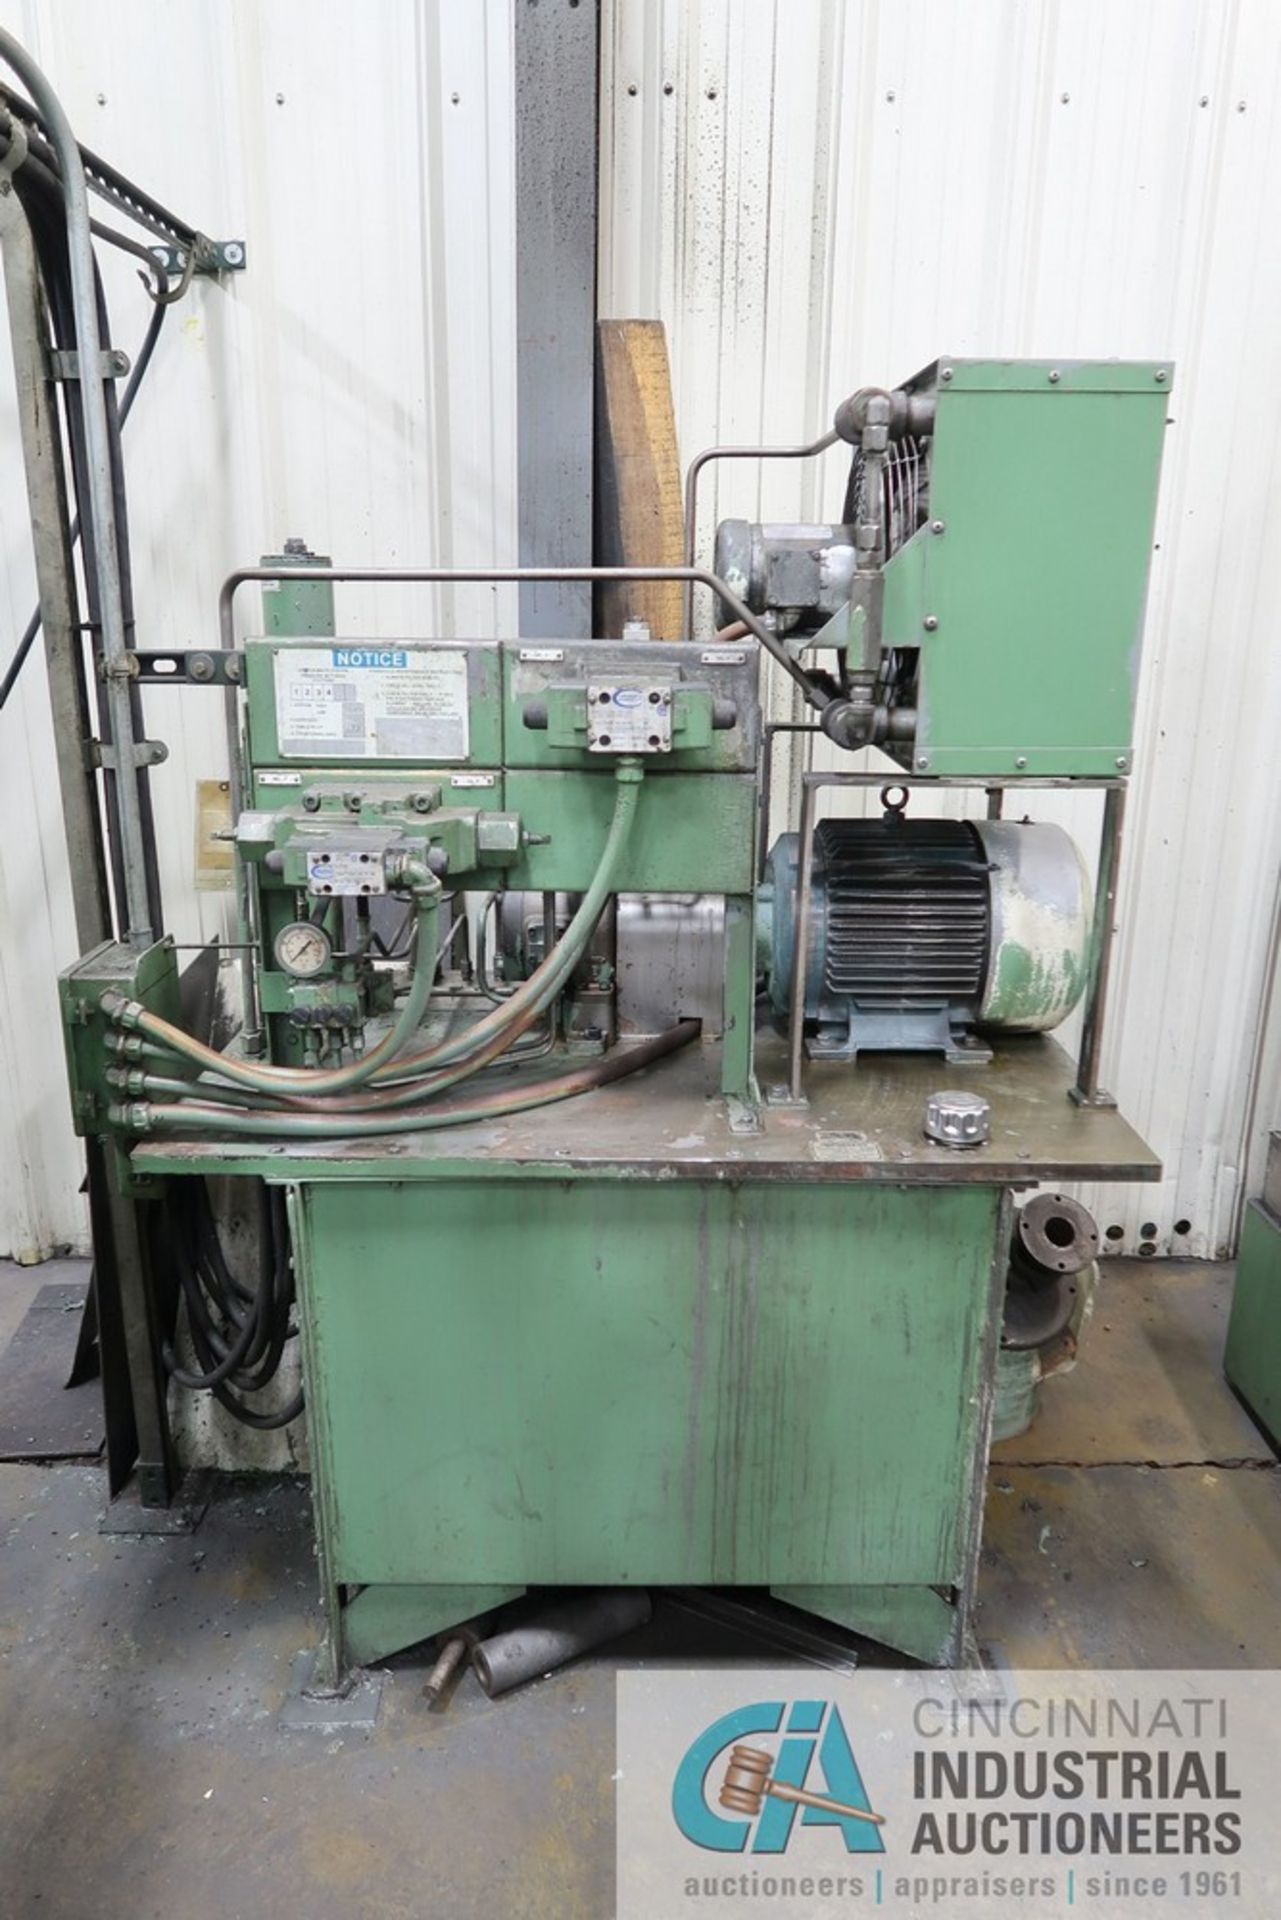 48" DIAMETER MATTISON ROTARY TABLE SURFACE GRINDER; S/N 24-799, 75 HP MOTOR, COOLANT FILTRATION, - Image 12 of 16